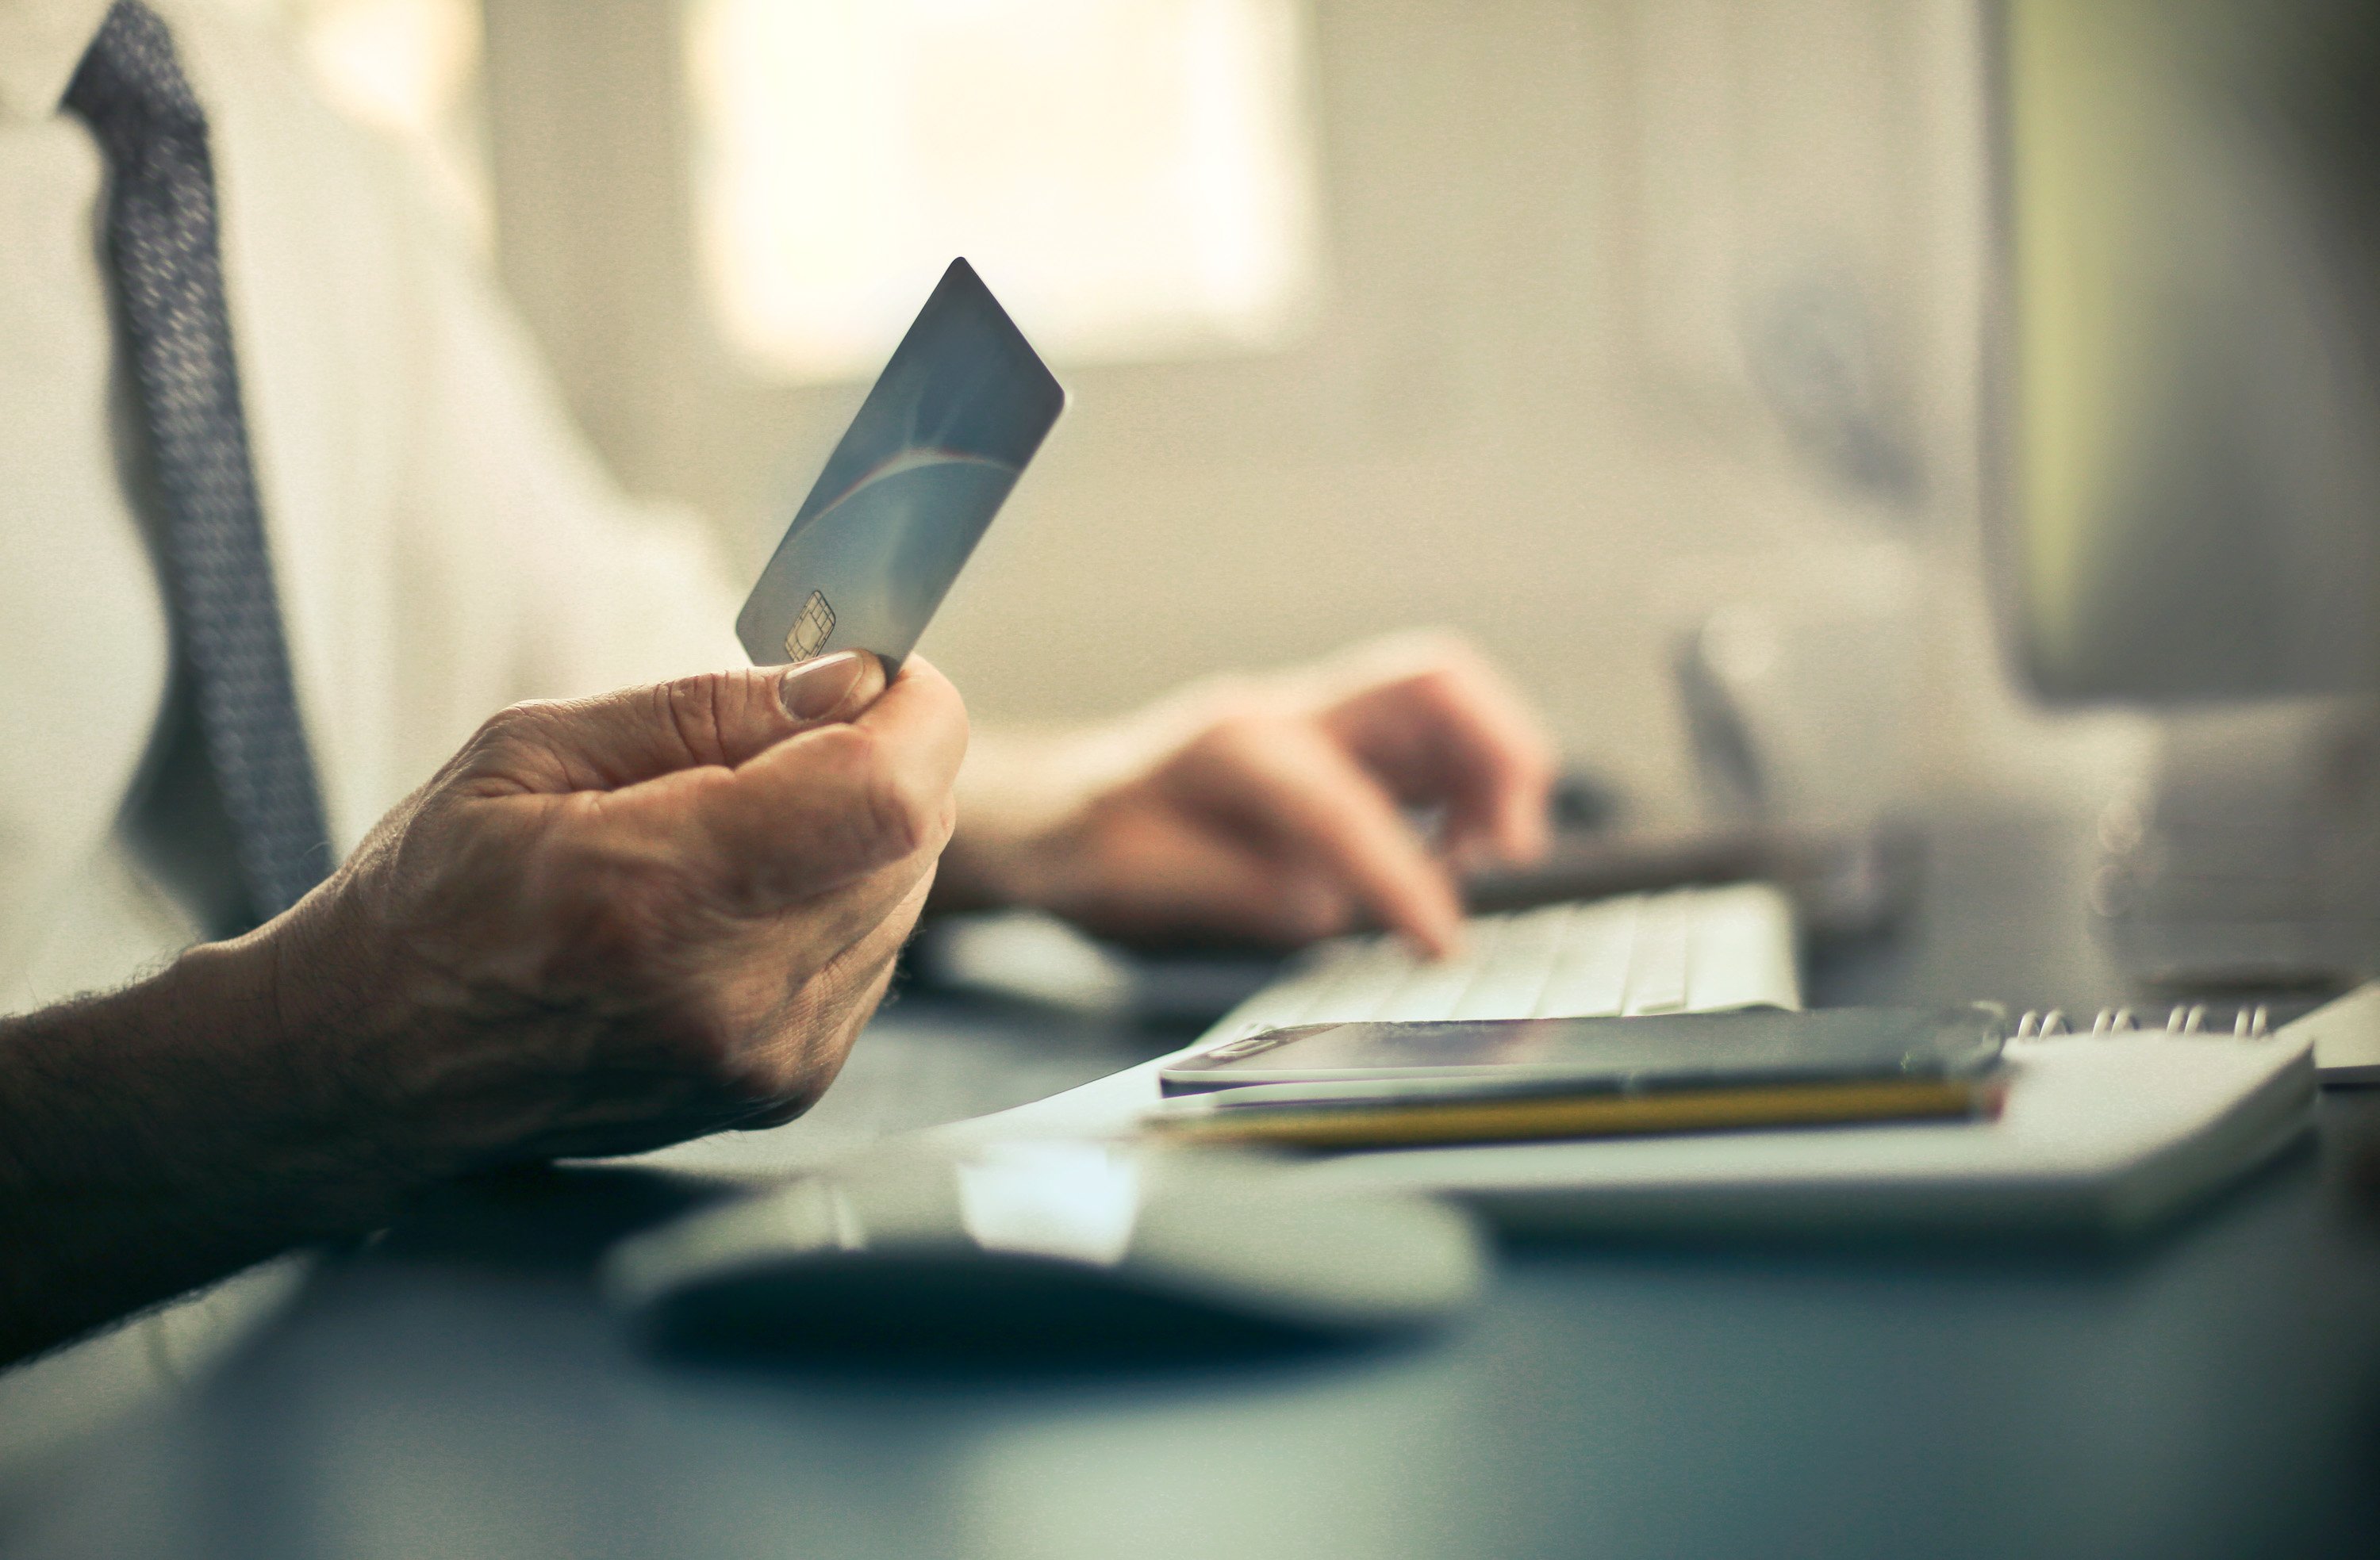 See how to apply online to get this credit card. Source: Pexels.